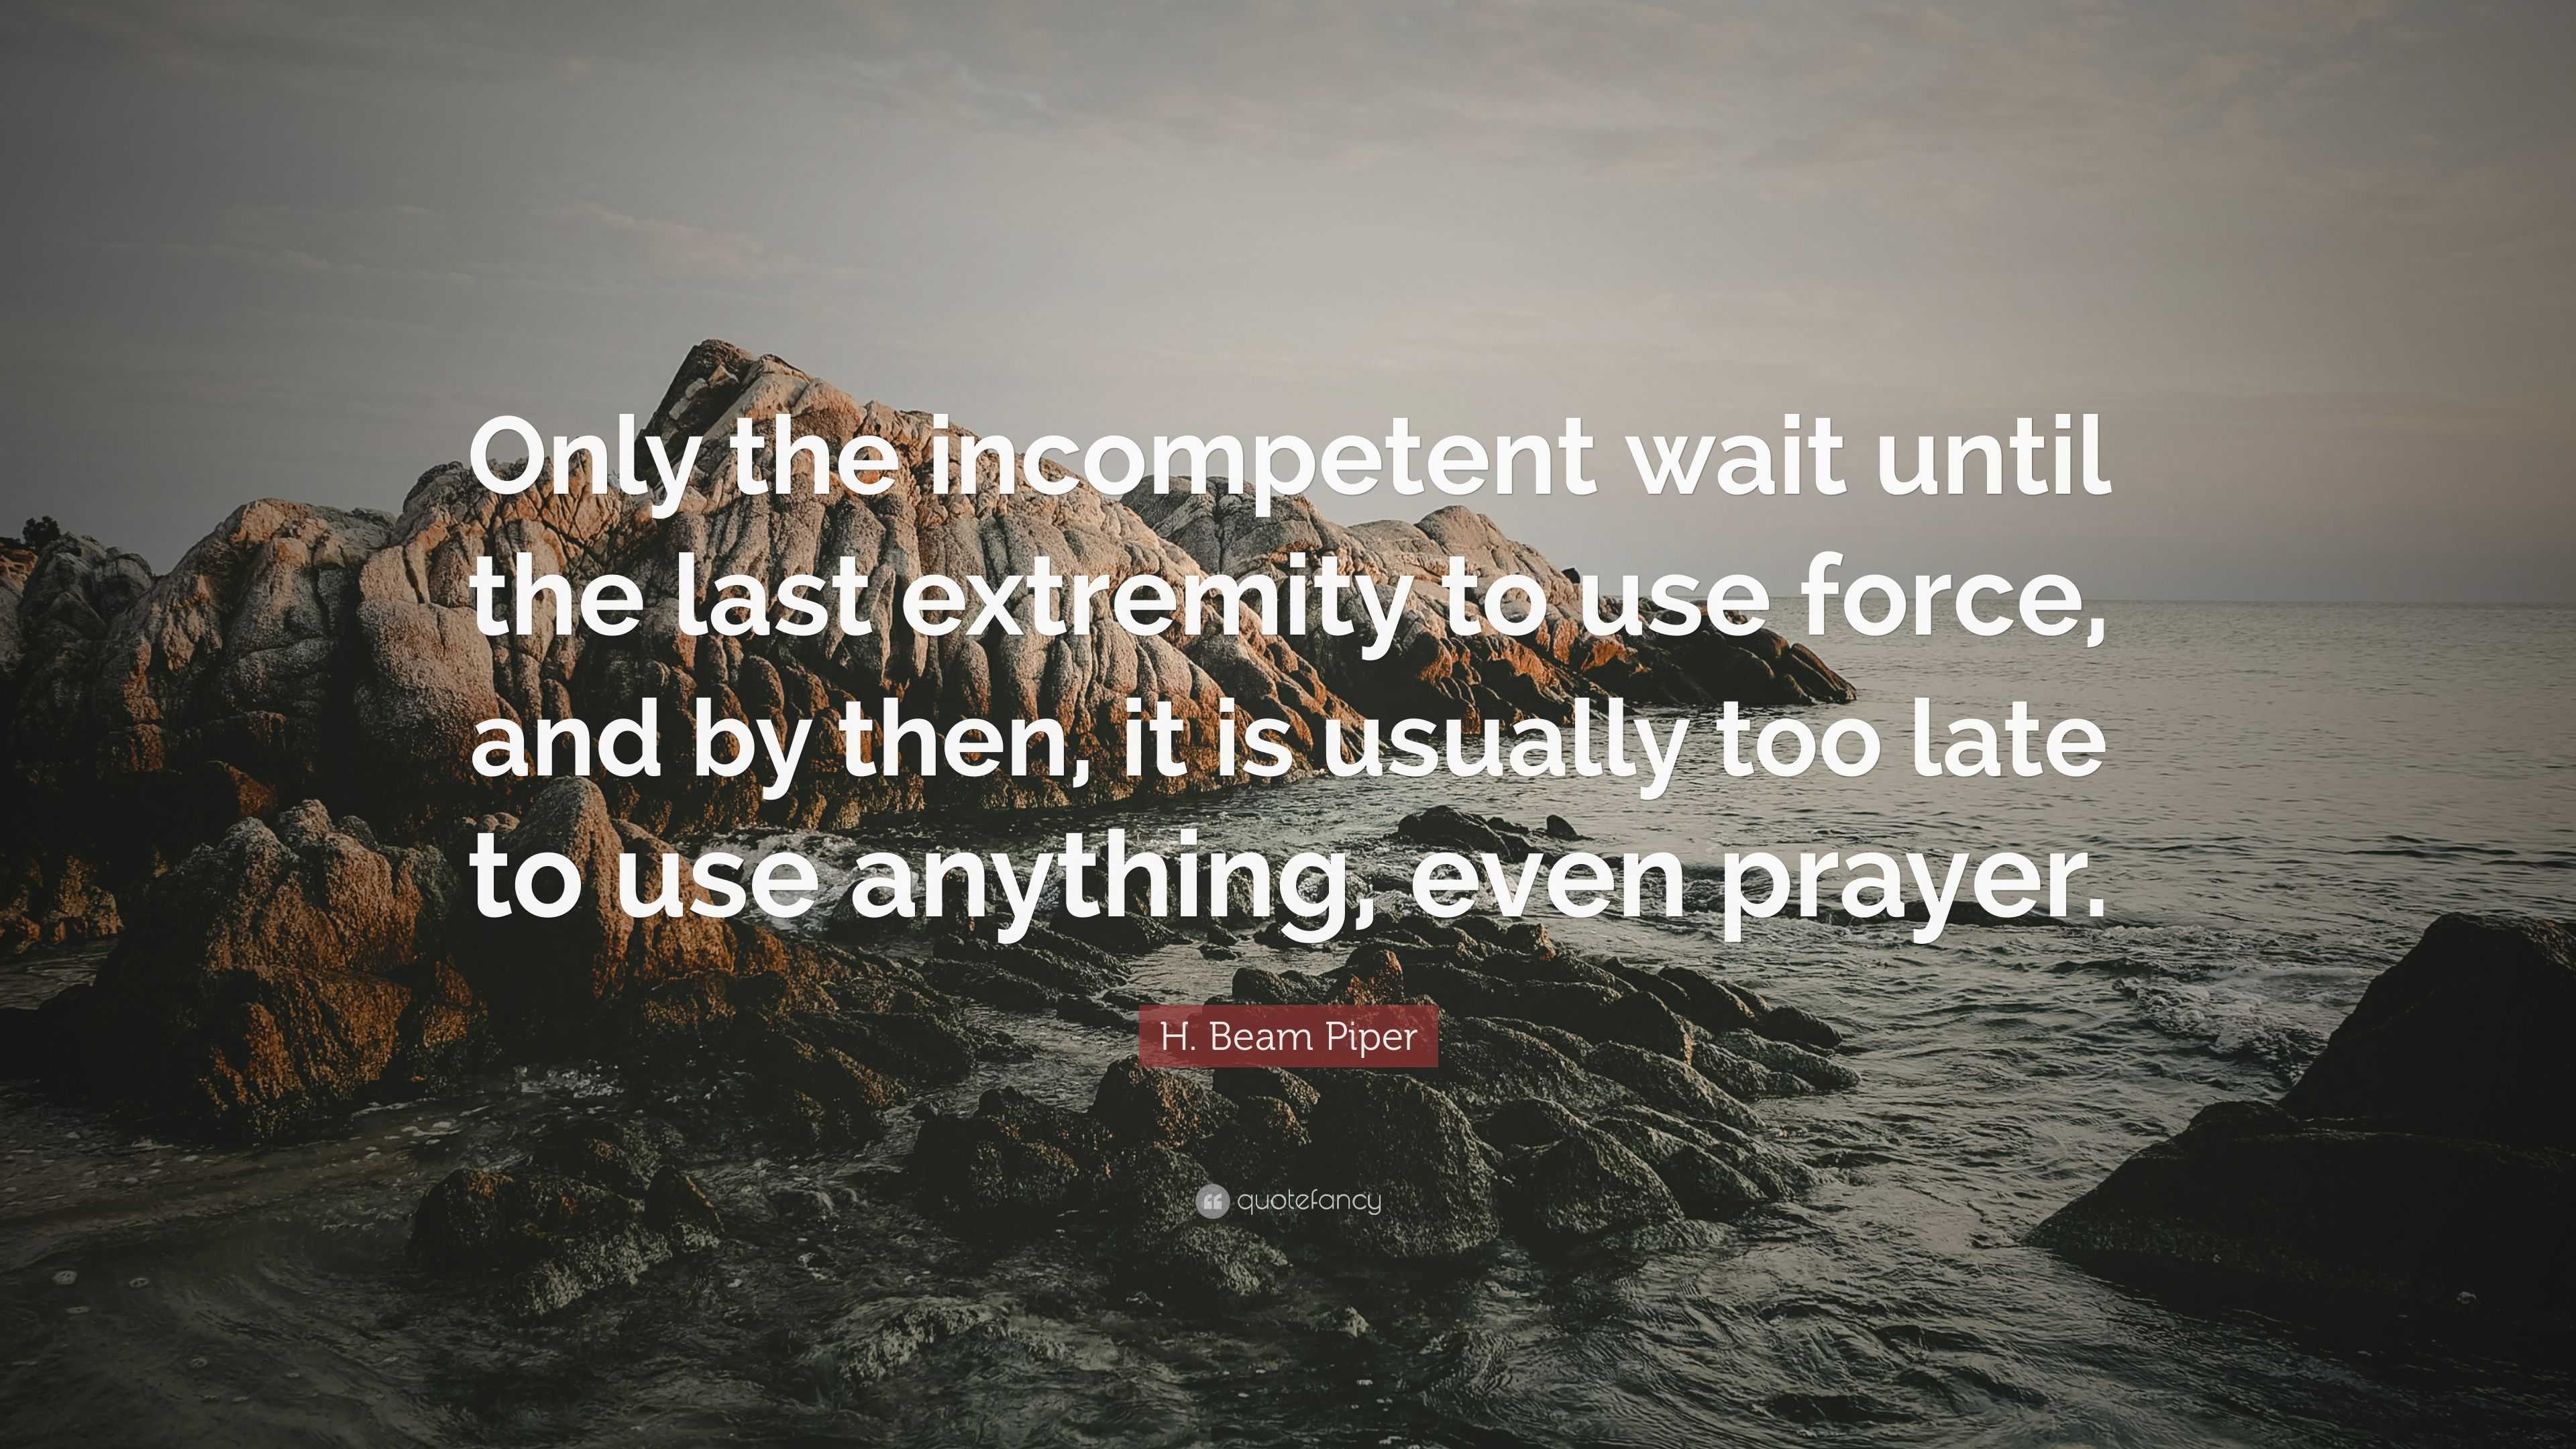 H. Beam Piper Quote: “Only the incompetent wait until the last ...